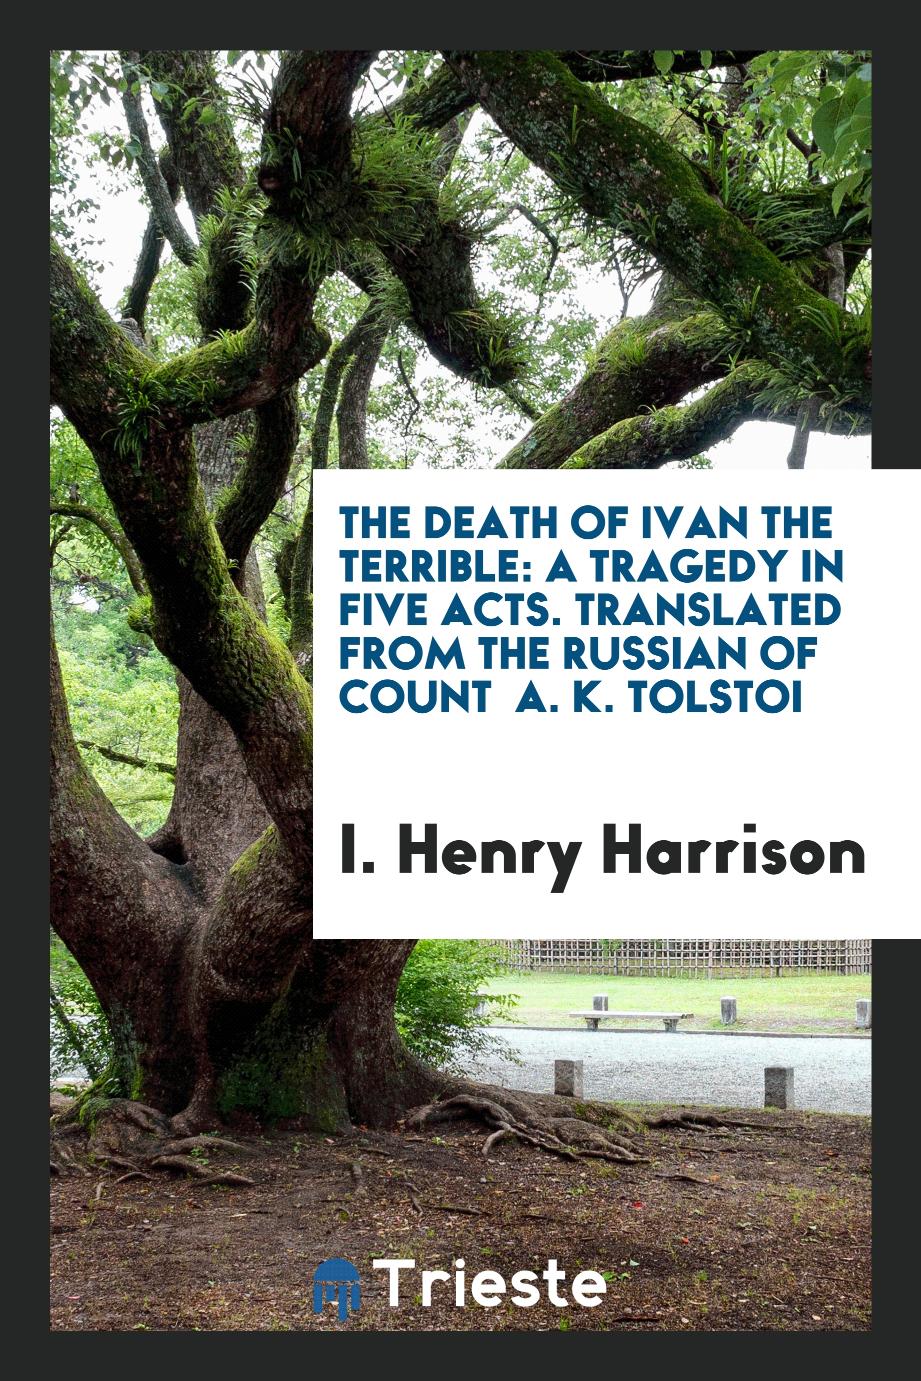 The Death of Ivan the Terrible: A Tragedy in Five Acts. Translated from the Russian of Count A. K. Tolstoi